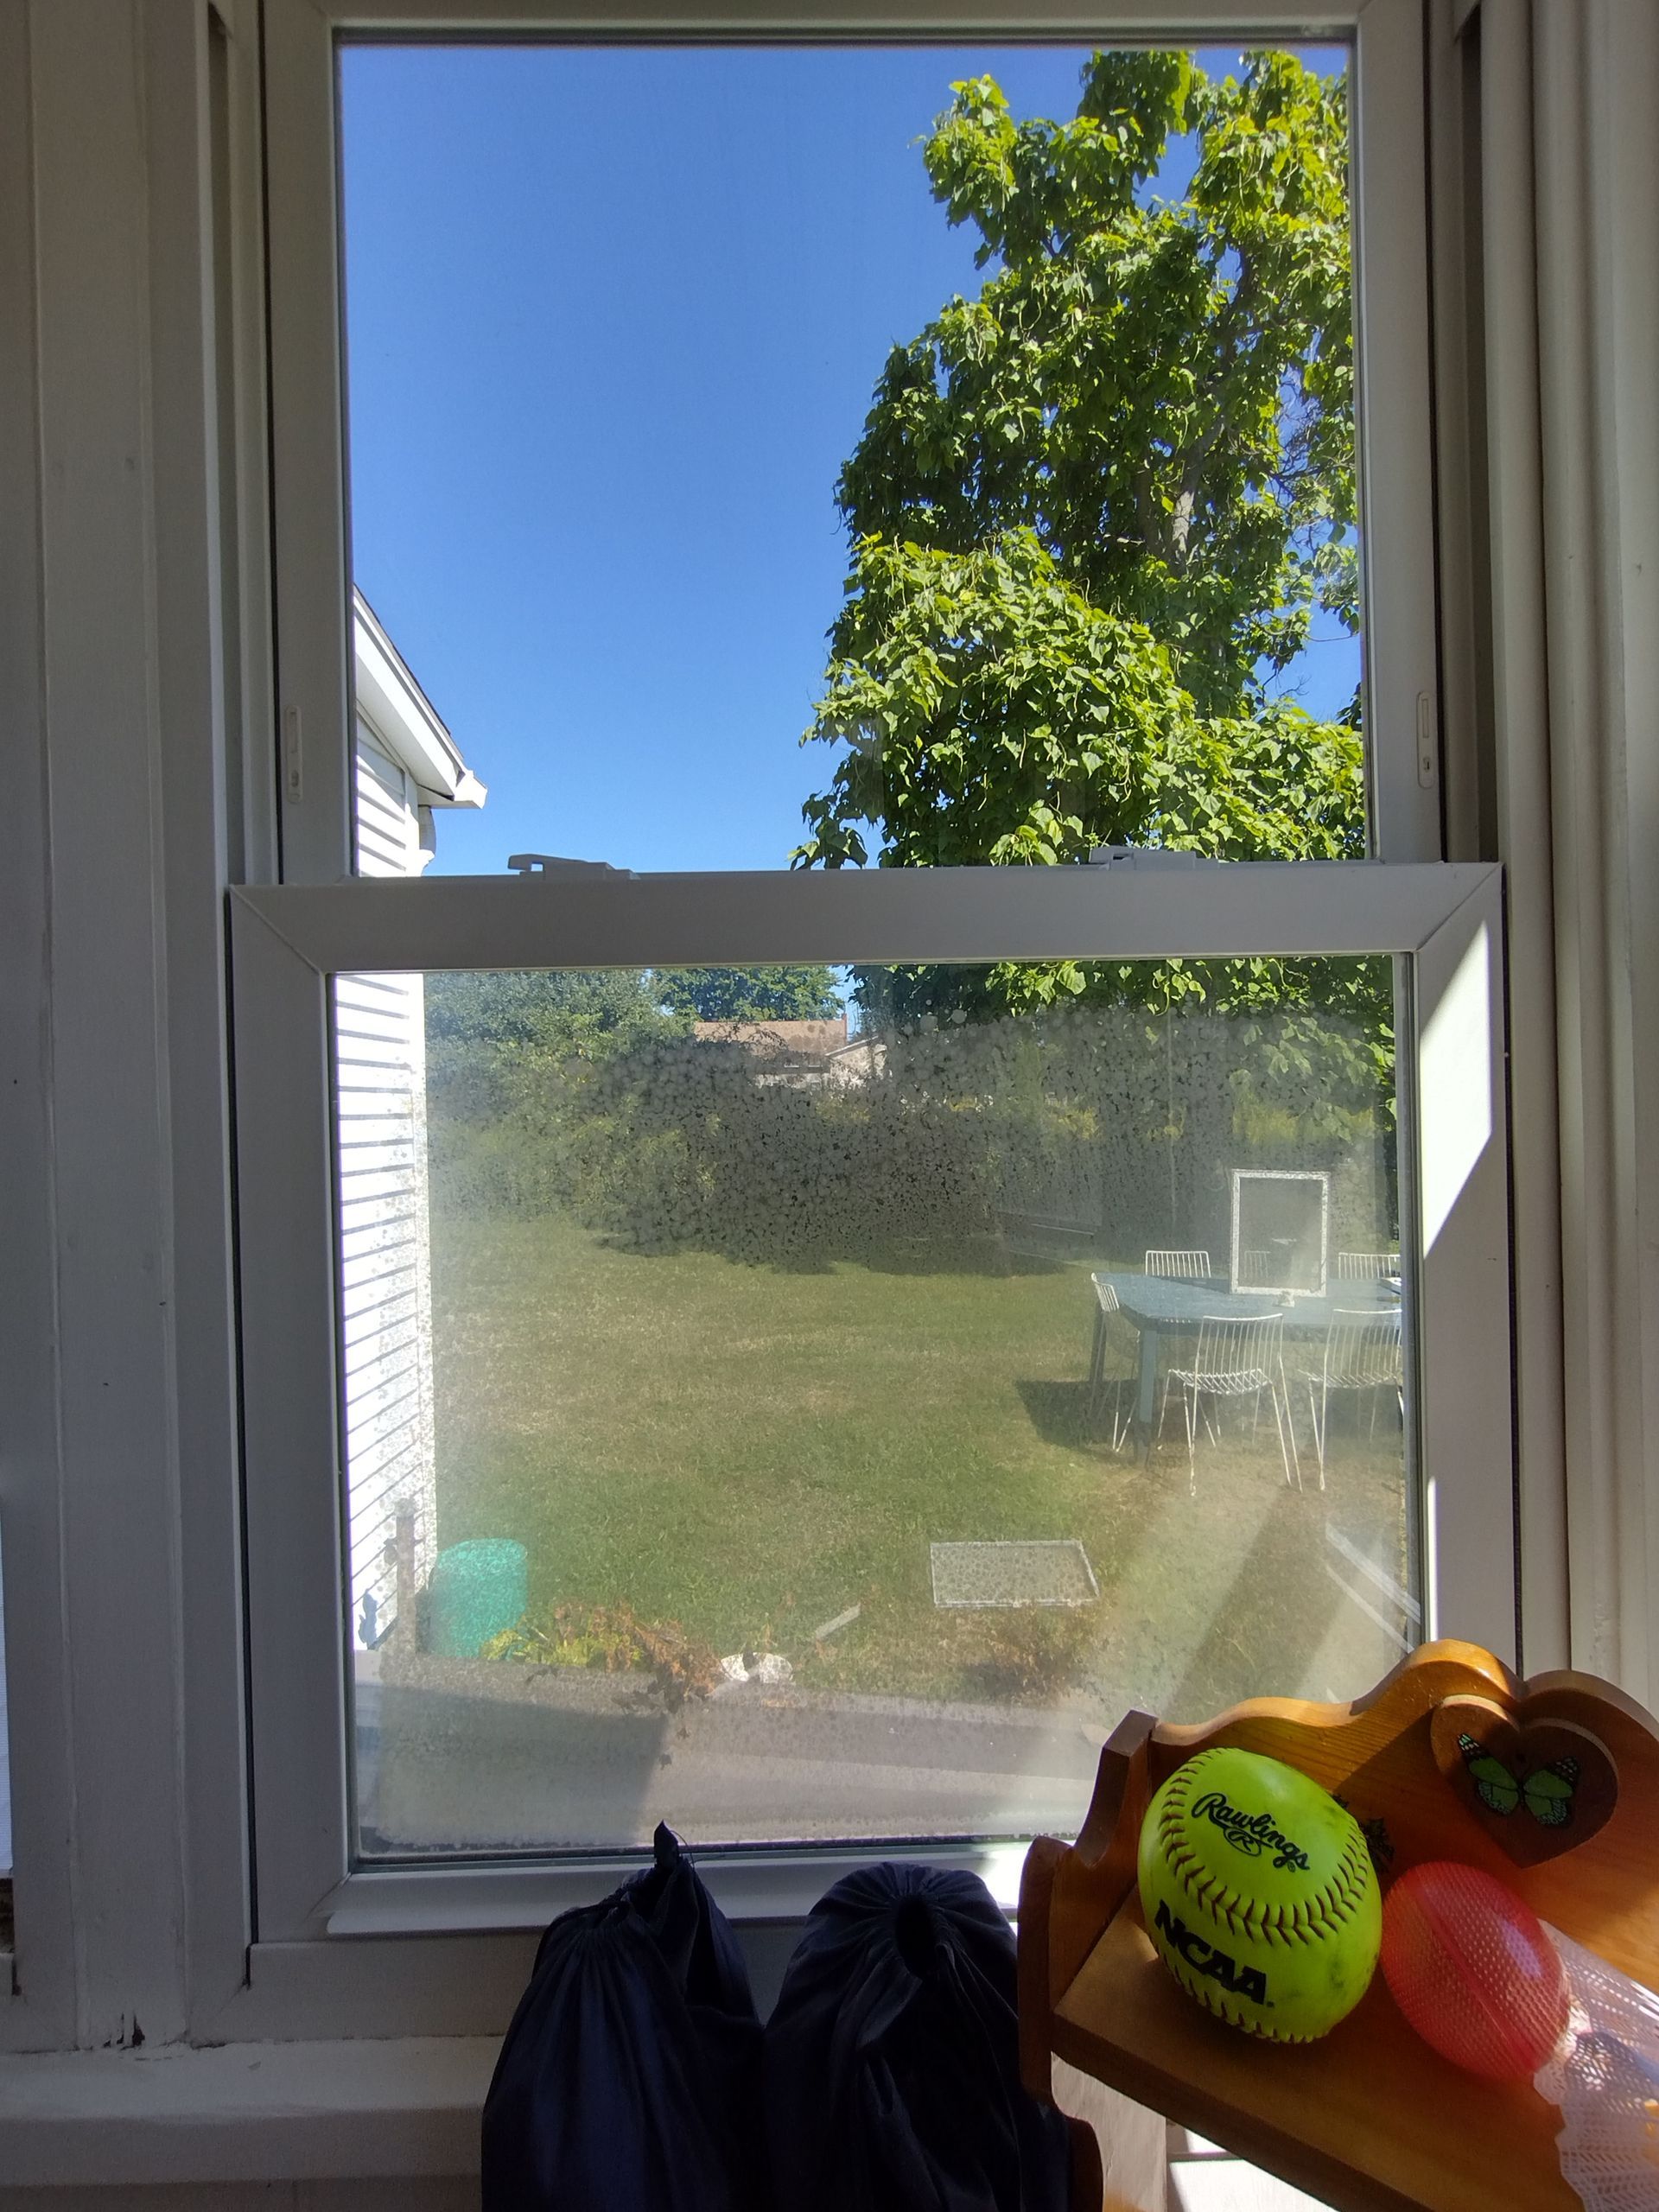 A tennis ball is sitting on a table in front of a window.